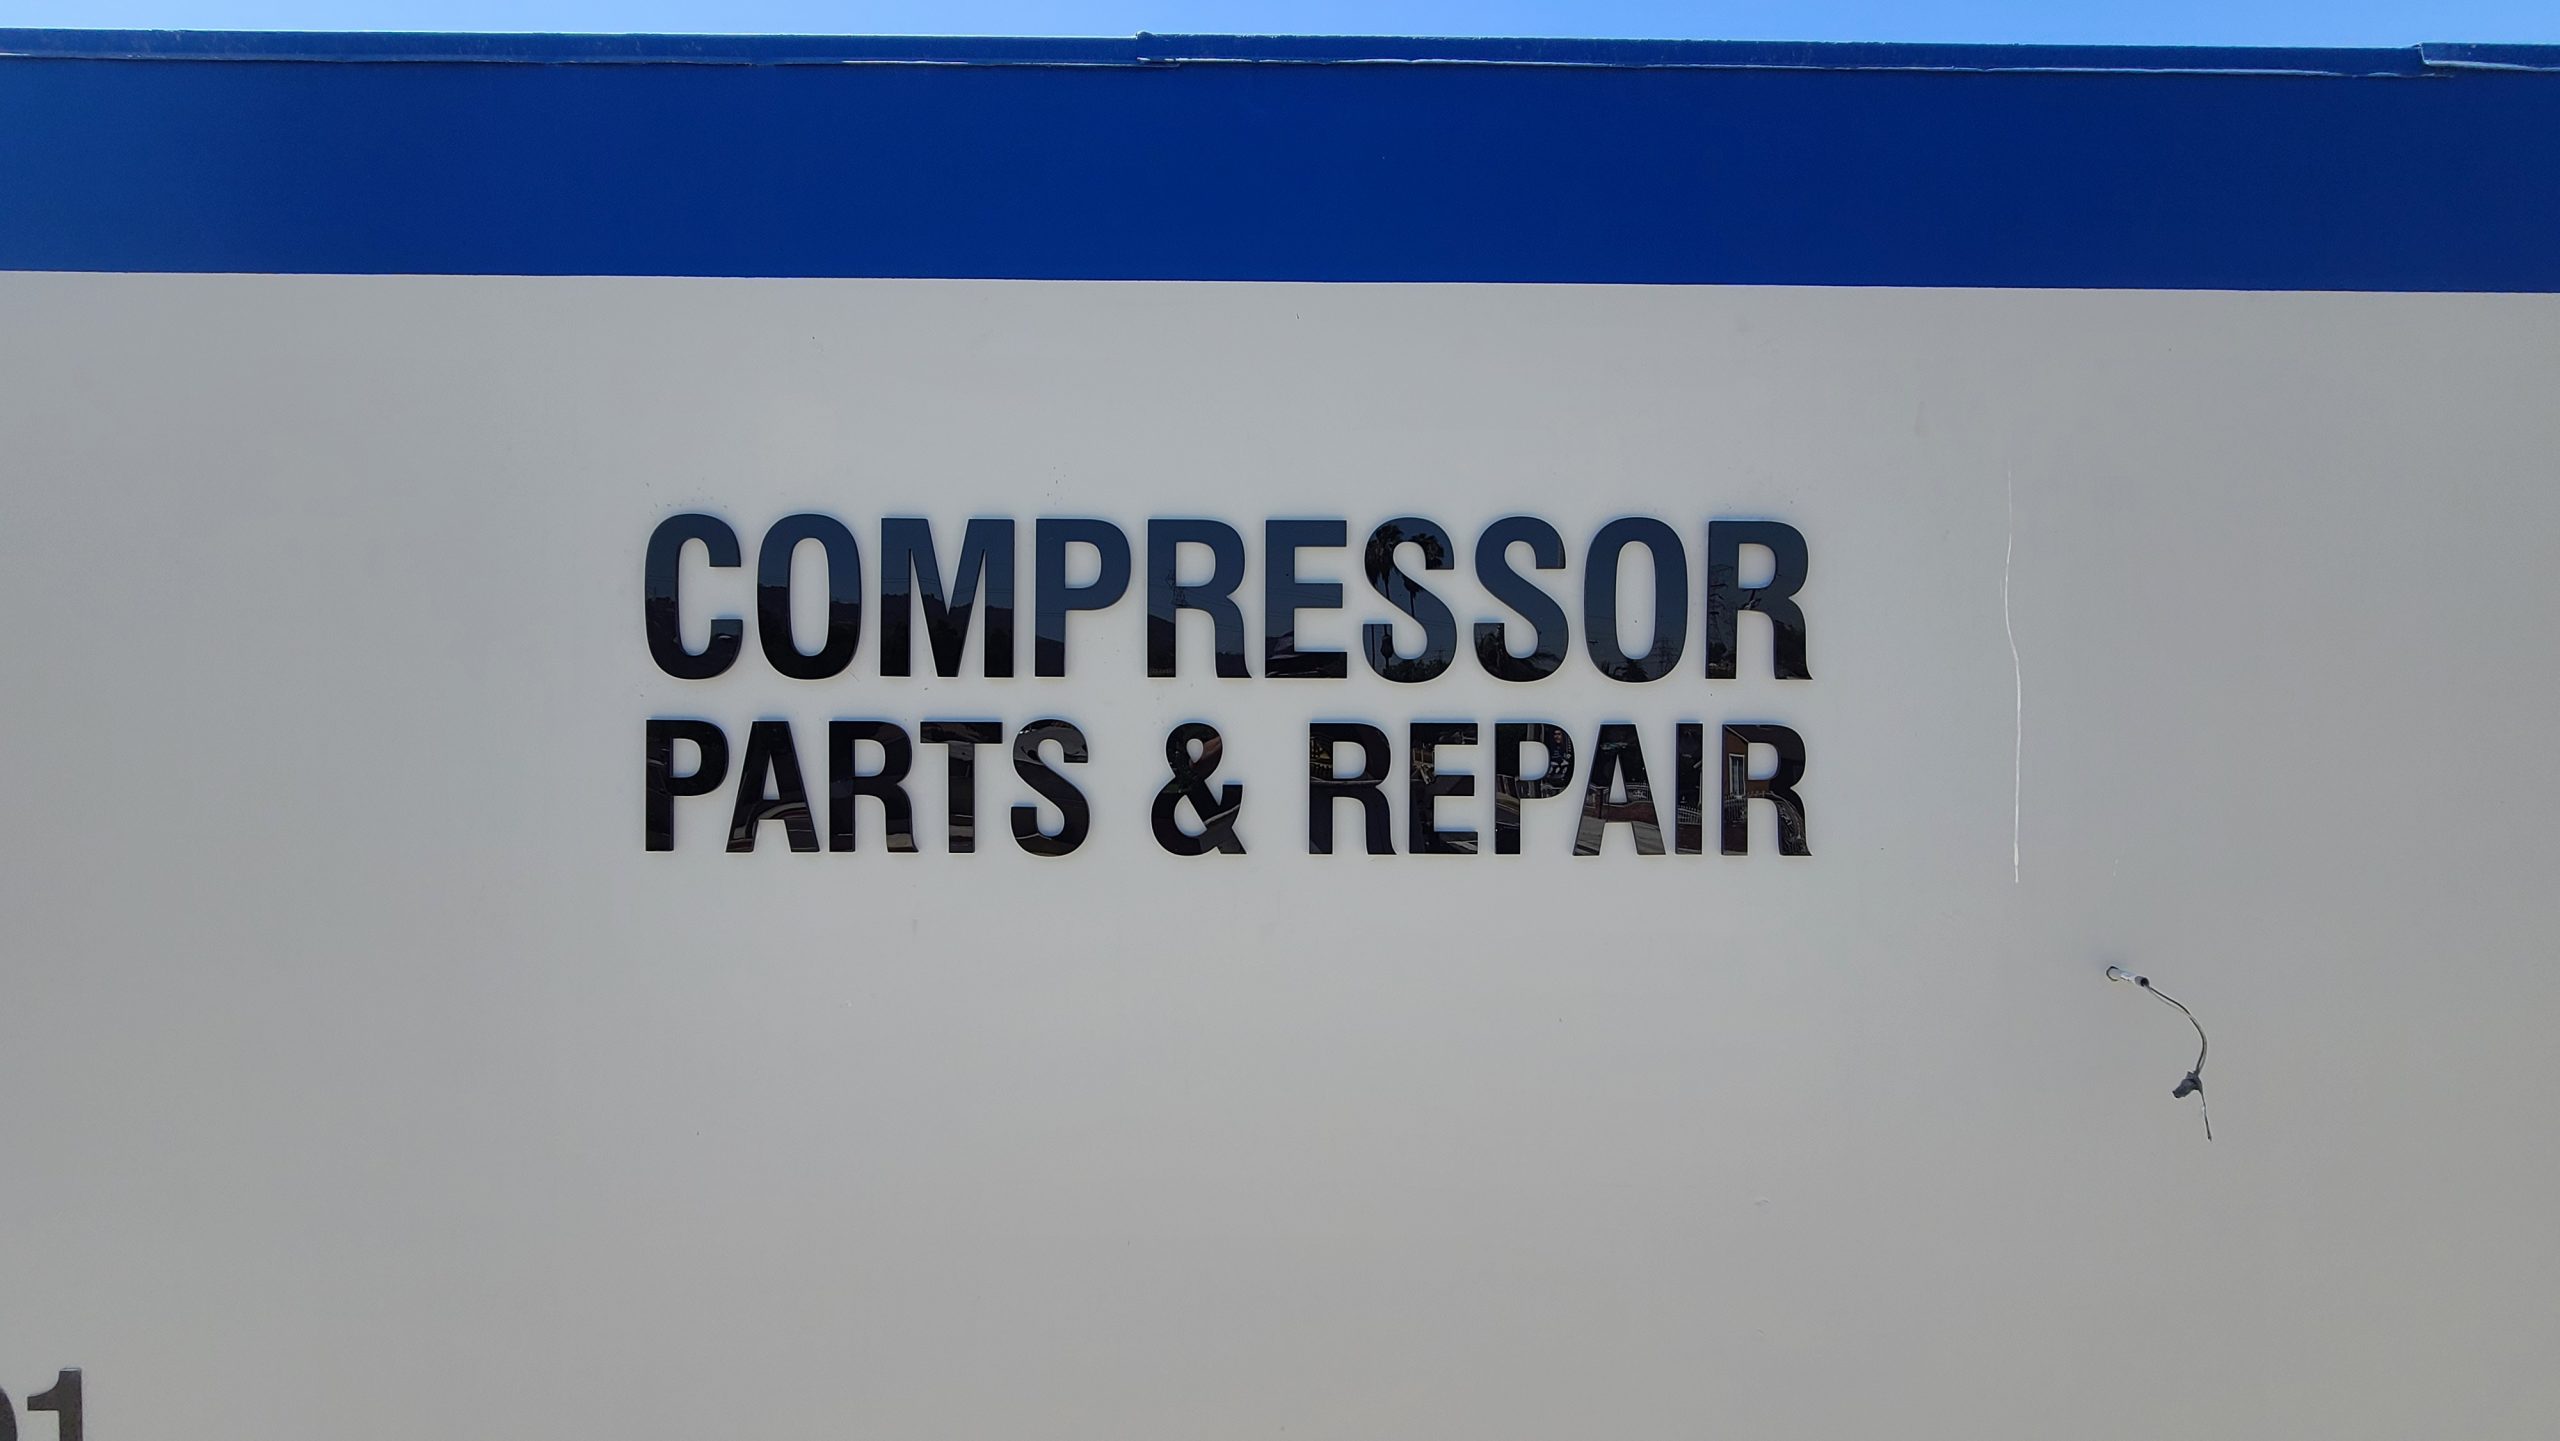 You are currently viewing Black Acrylic Letters Business Sign for Compressor Parts and Repair in South El Monte